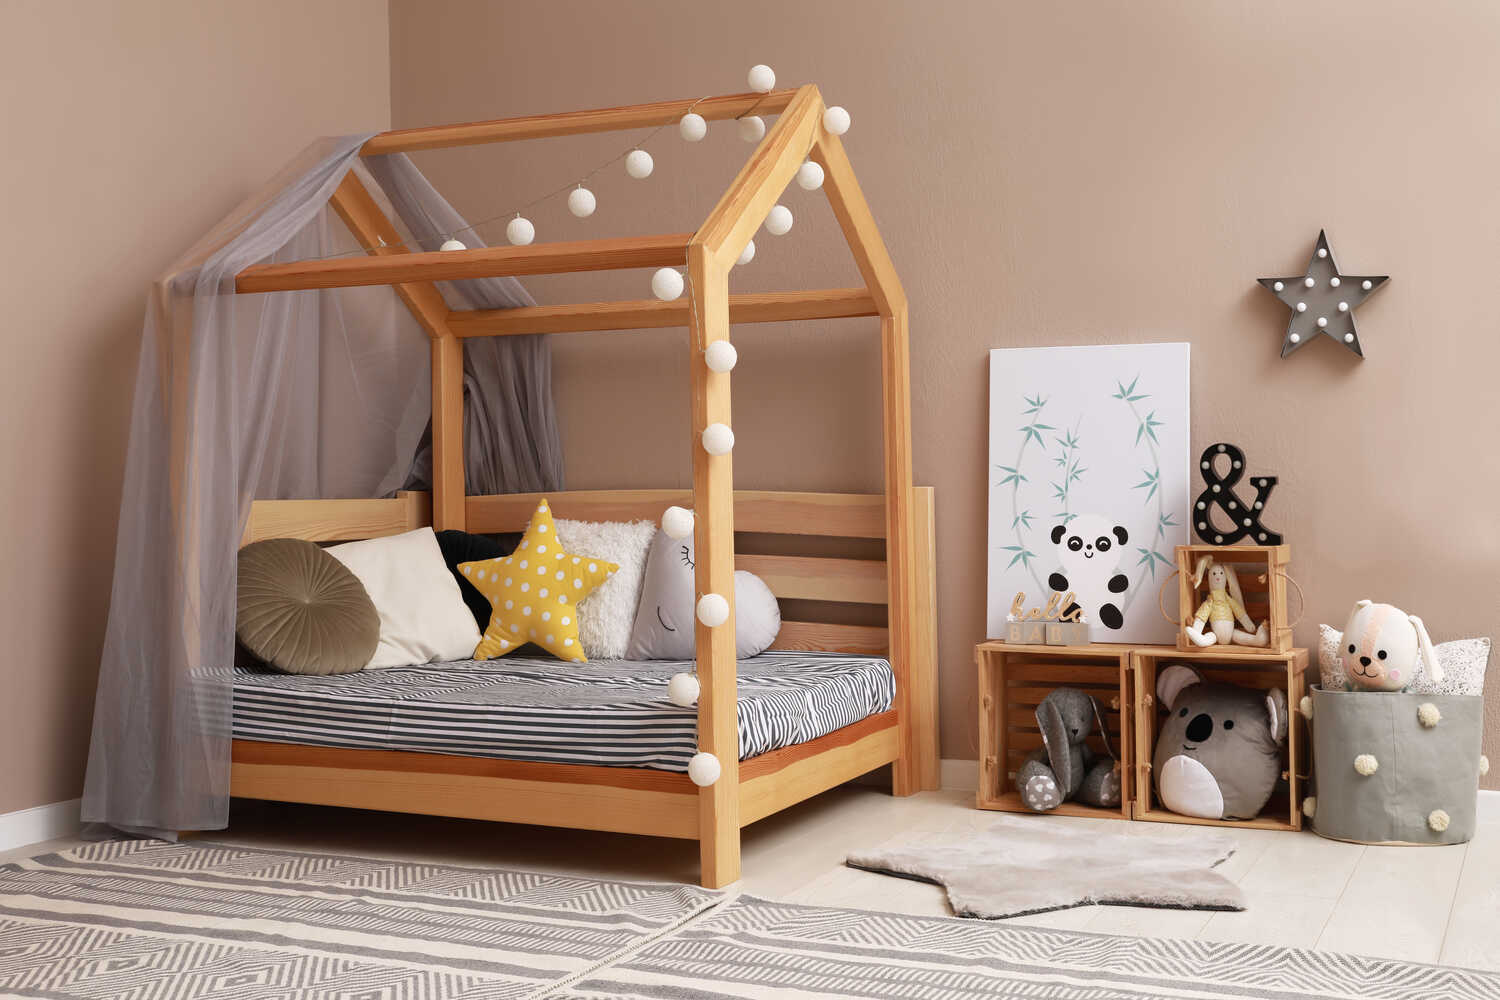 A low lying toddler bed is ideal for kids